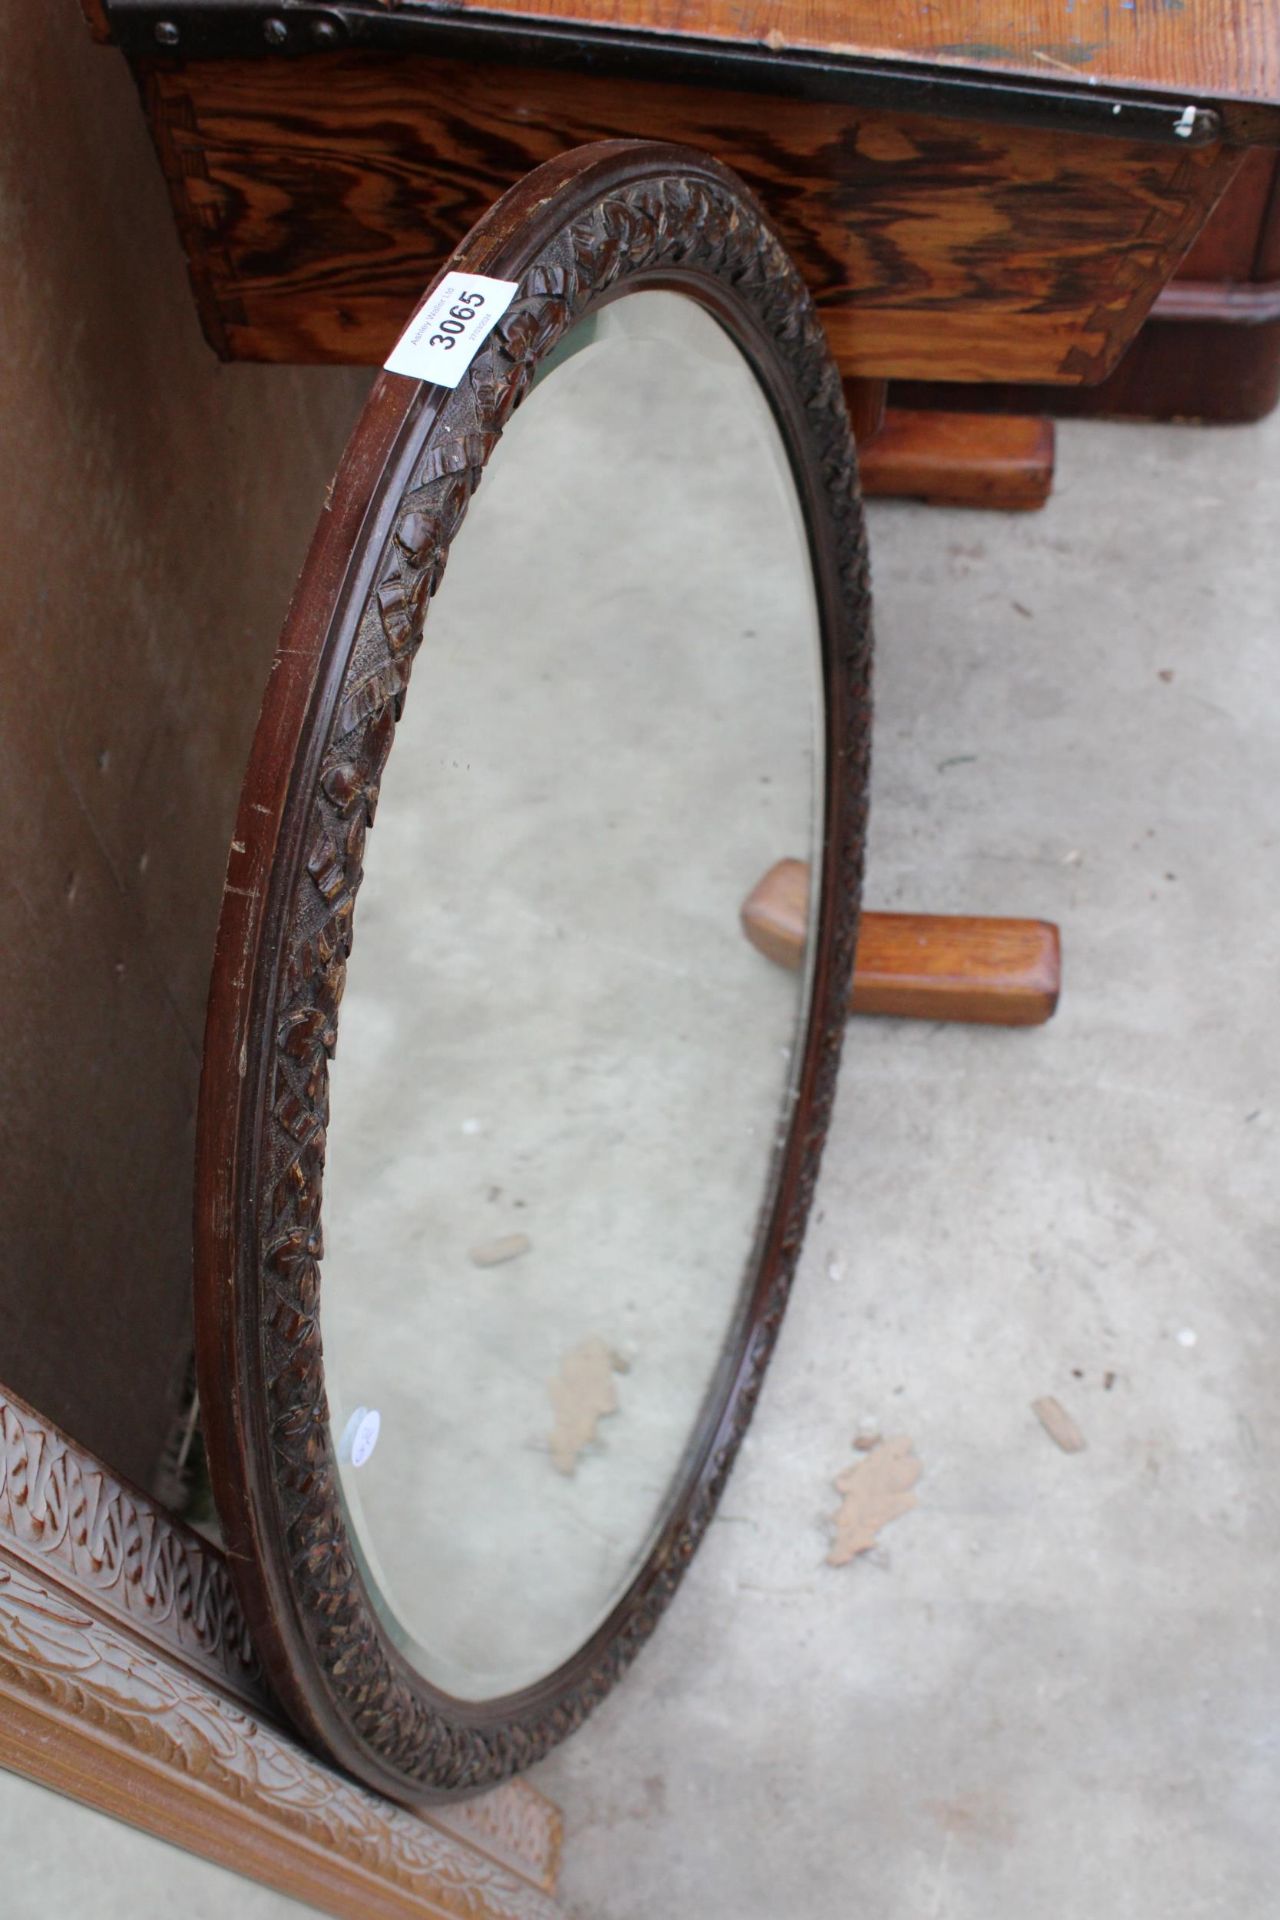 AN EDWARDIAN OVAL BEVEL EDGE MIRROR 33" X 22" - Image 2 of 2